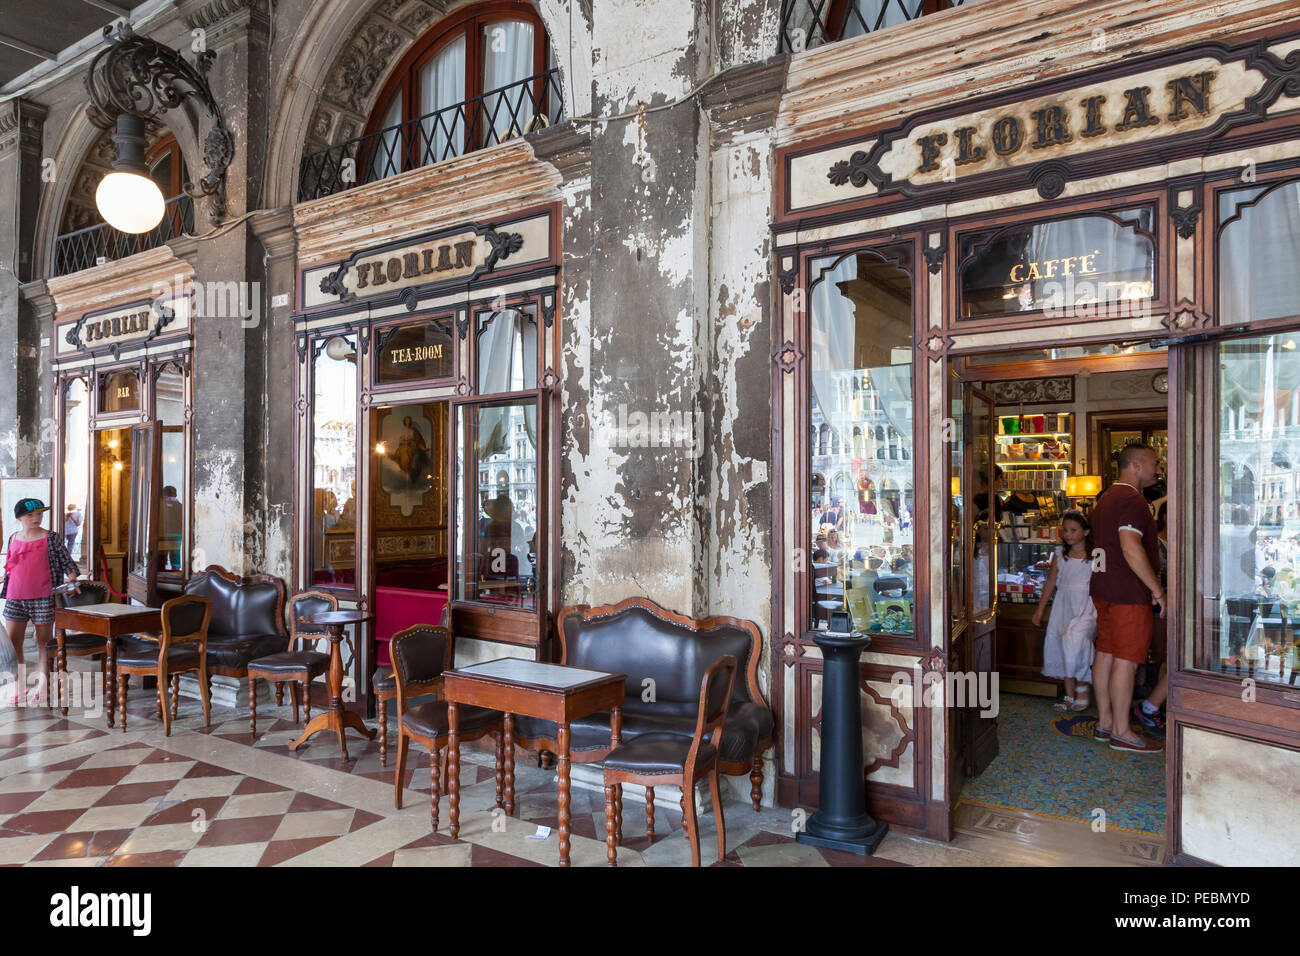 Exterior facade Caffe Florian, Piazza San Marco, San Marco, Venice, Veneto,  Italy. Opened in 1720 it is the oldest cafe in the world. People inside  Stock Photo - Alamy